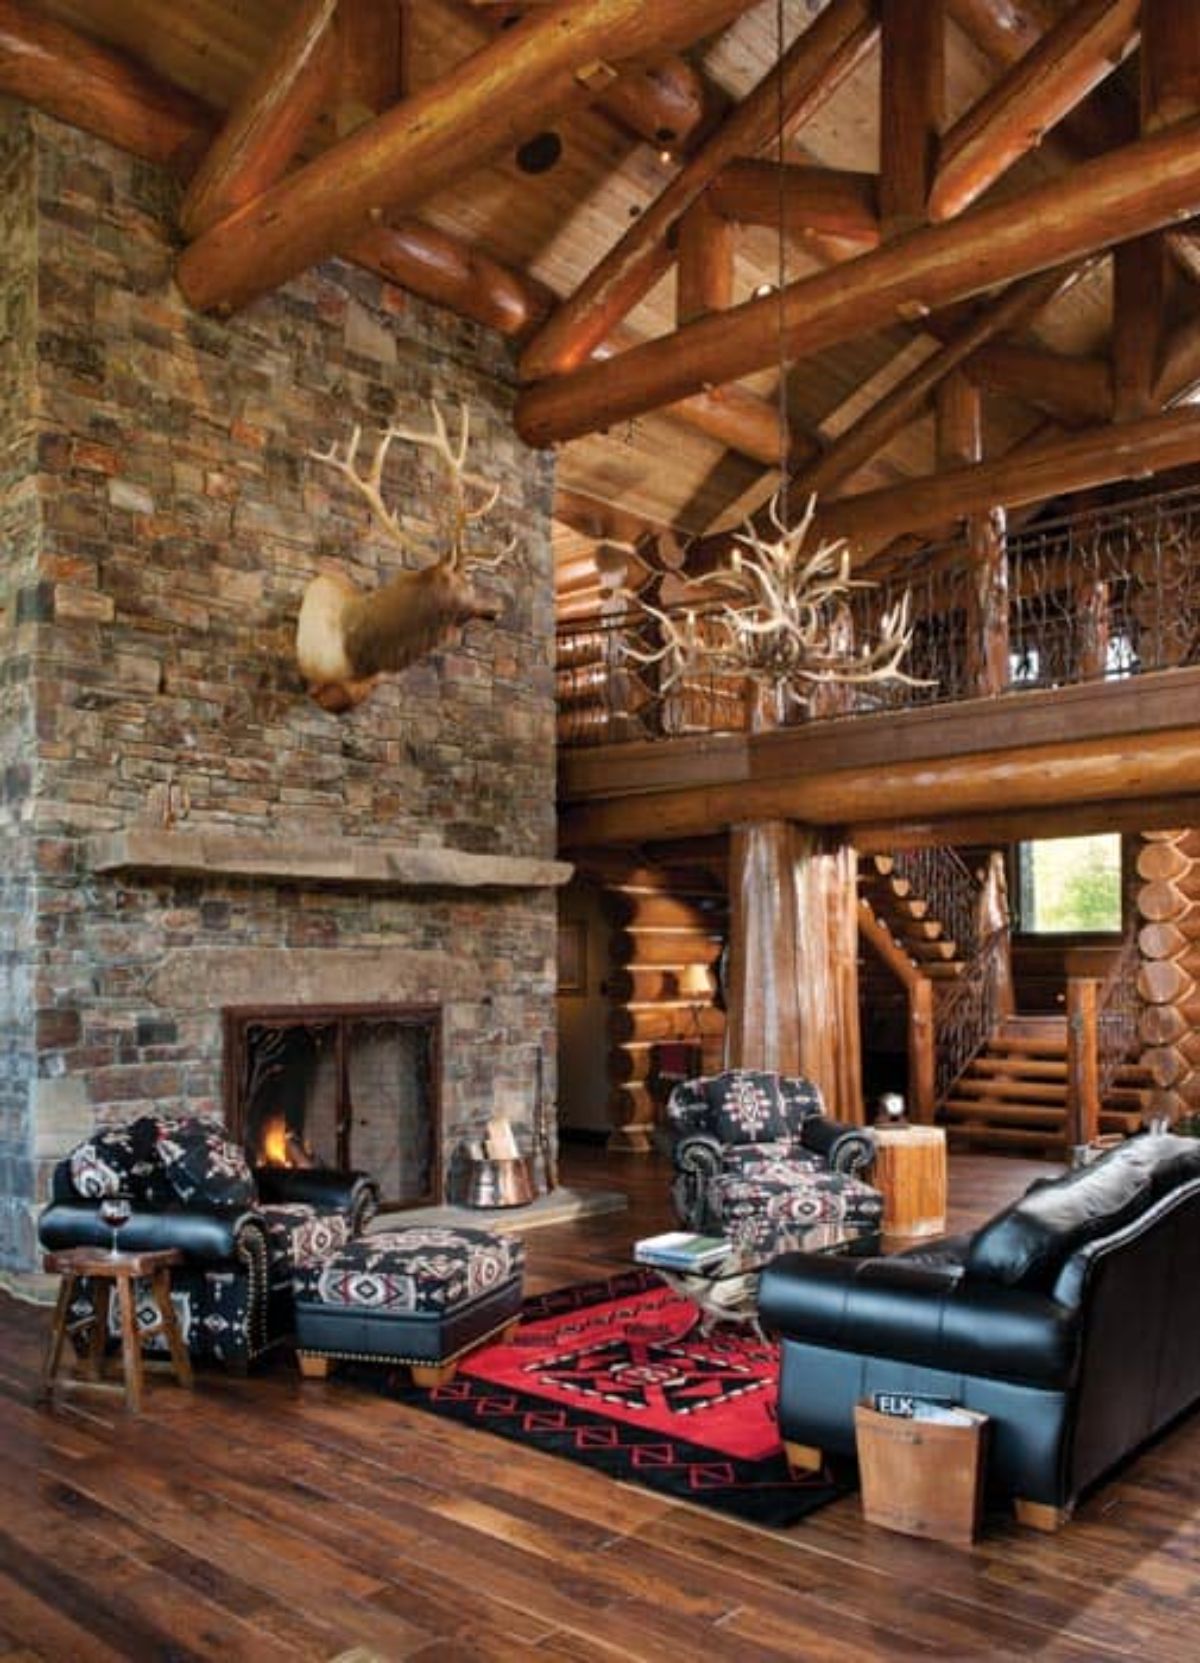 stone fireplace in living rea with loft in background and black leather sofa in foreground